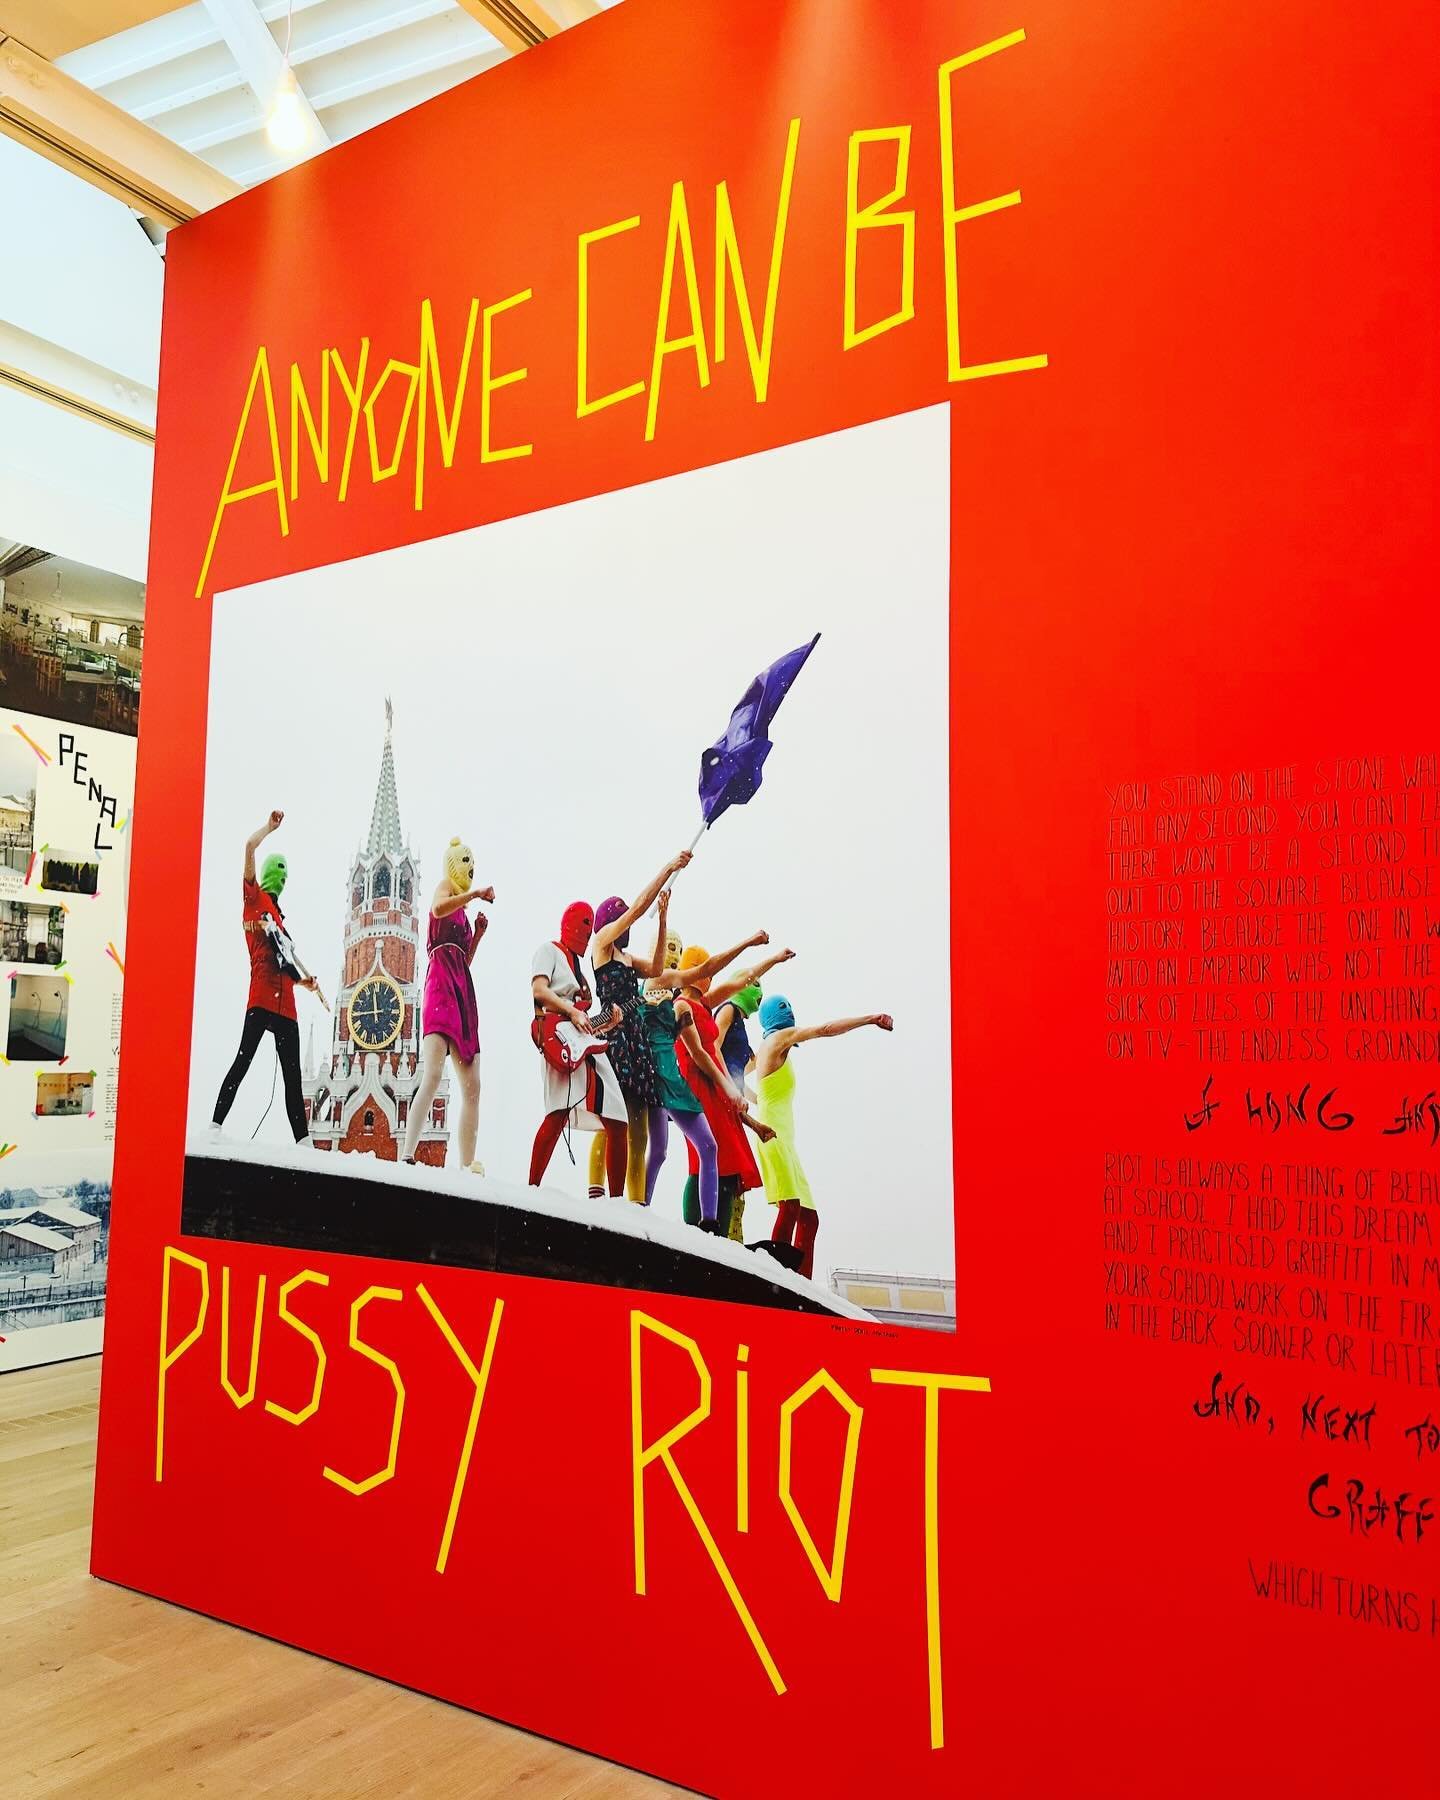 Just&hellip; WOW&hellip; 💗🖤❤️🔥💗🖤&hearts;️🔥 a brave, unapologetic, and fearlessly executed show. If you want to see real artist activism in action, this is it. Kudos to everyone responsible for making this unique exhibition happen. 
.
.
.
#pussy